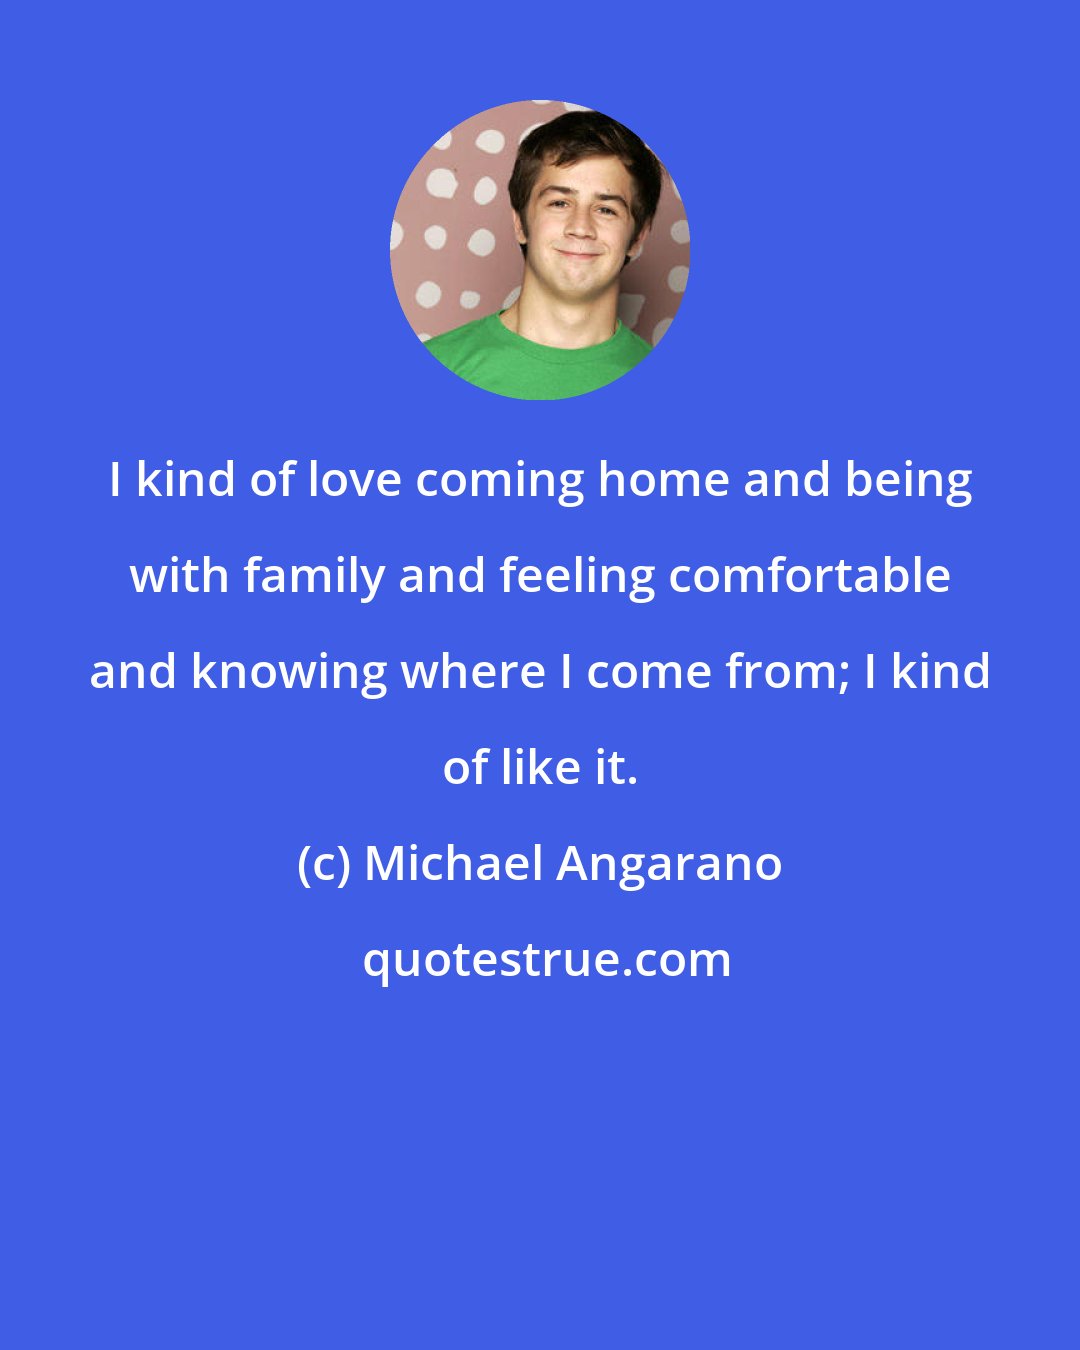 Michael Angarano: I kind of love coming home and being with family and feeling comfortable and knowing where I come from; I kind of like it.